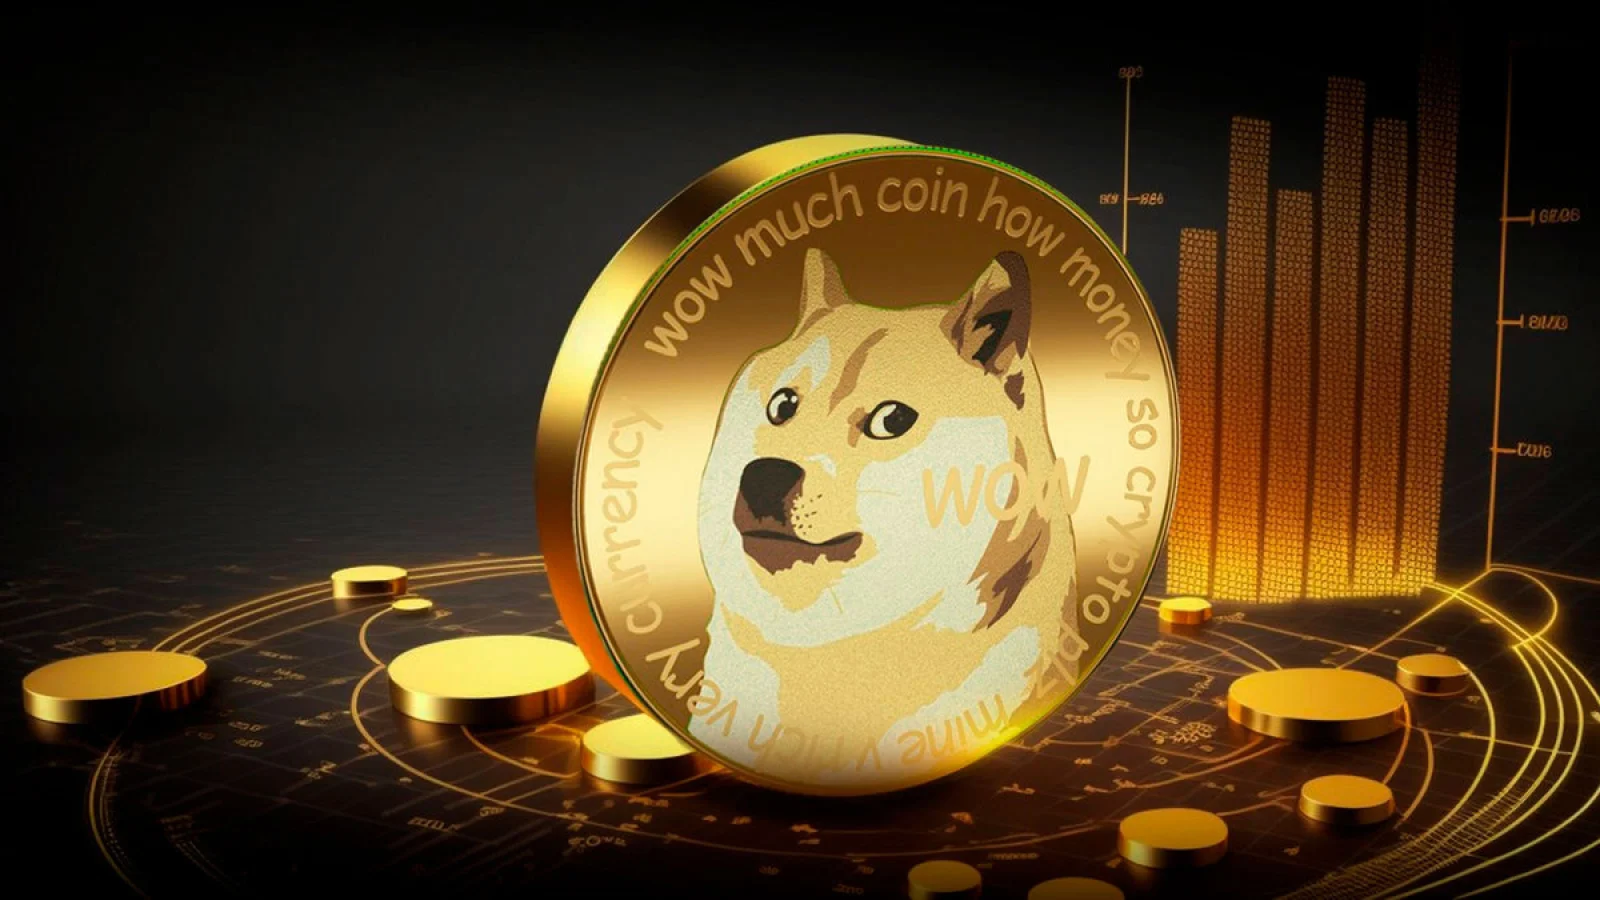 Dogecoin Price Slides Amidst Crypto Market Correction, But Will it Bounce Back and Take on Shiba Inu?